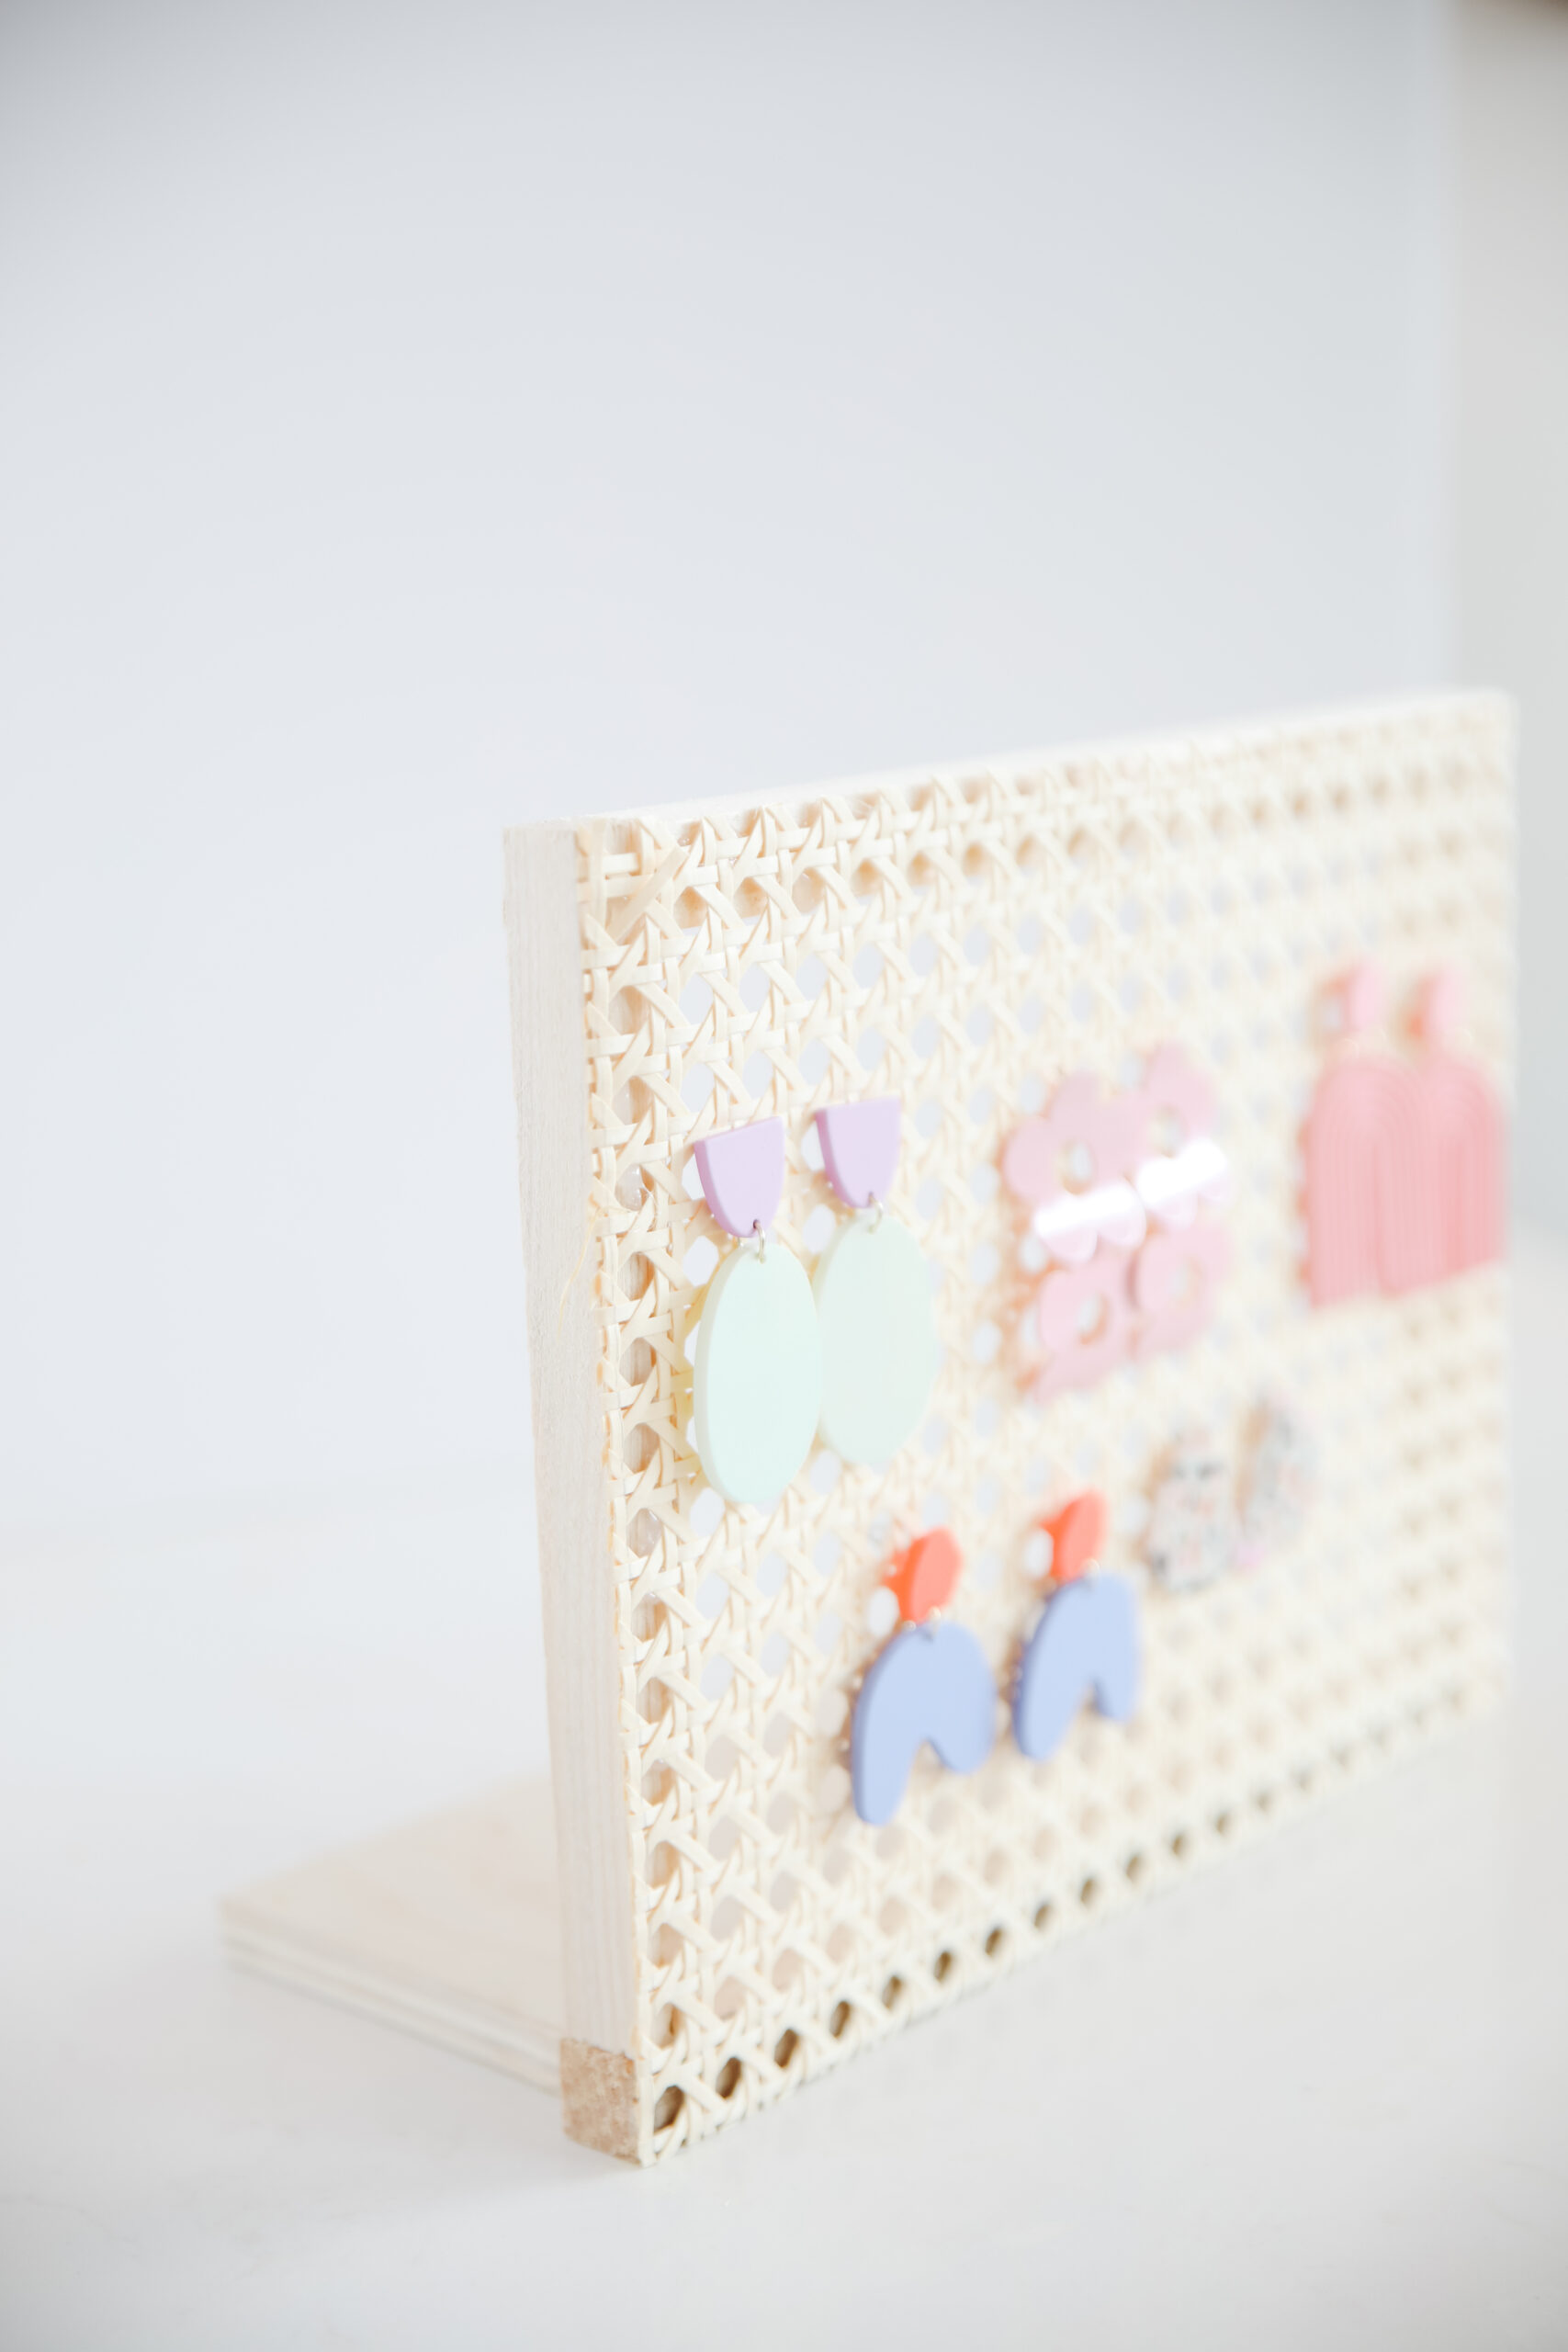 Start The New Year With This Cute DIY: A Super Easy Earring Organizer!